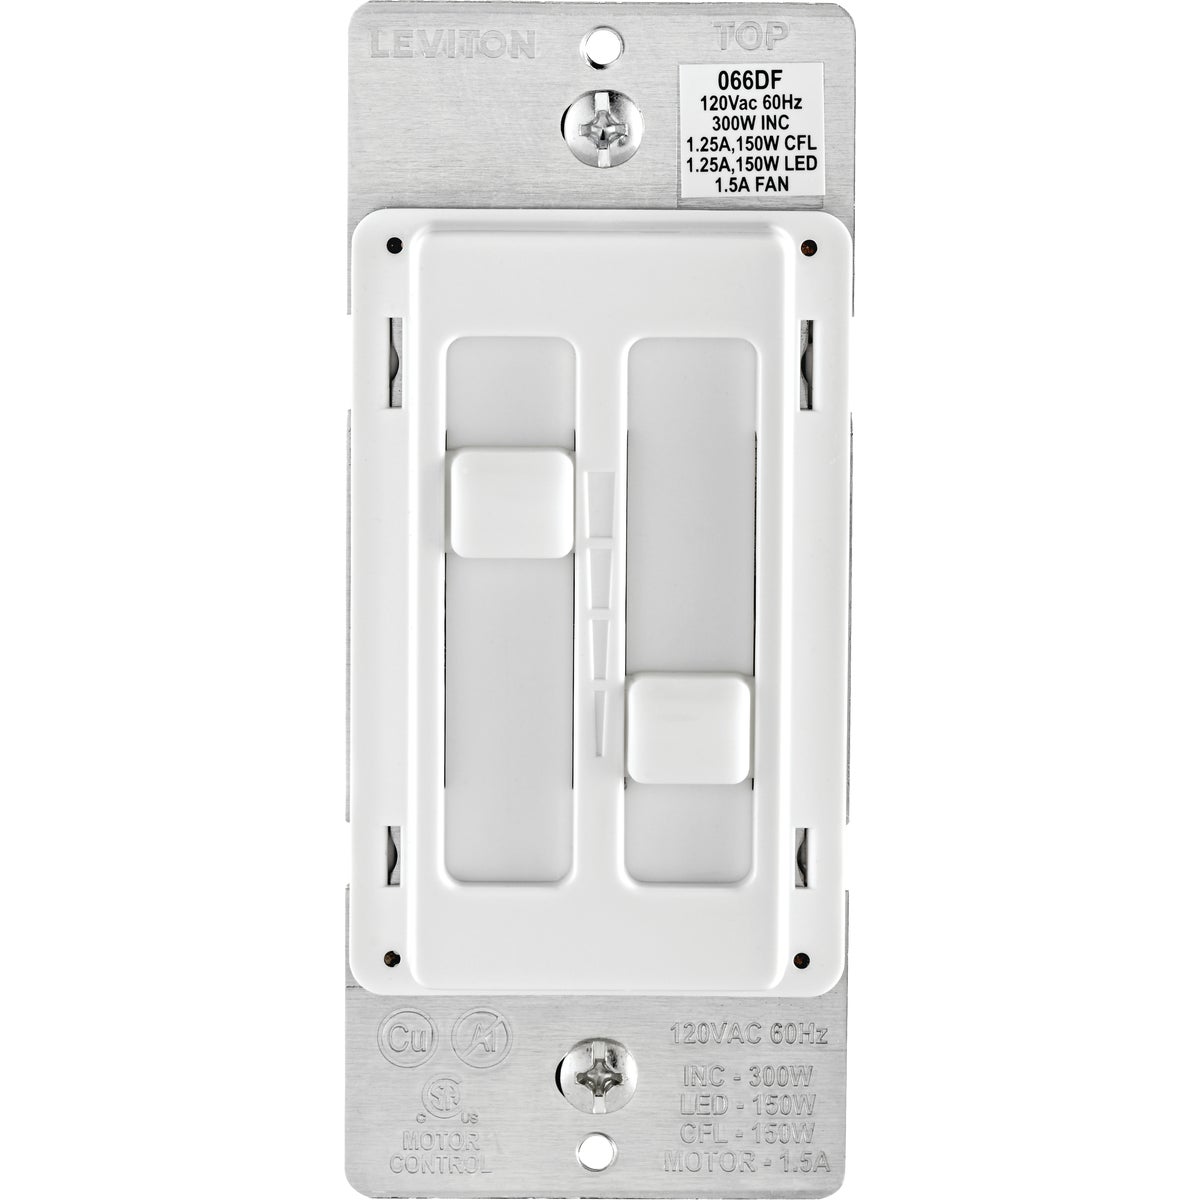 Item 568037, Dual quiet fan and light dimmer switch.